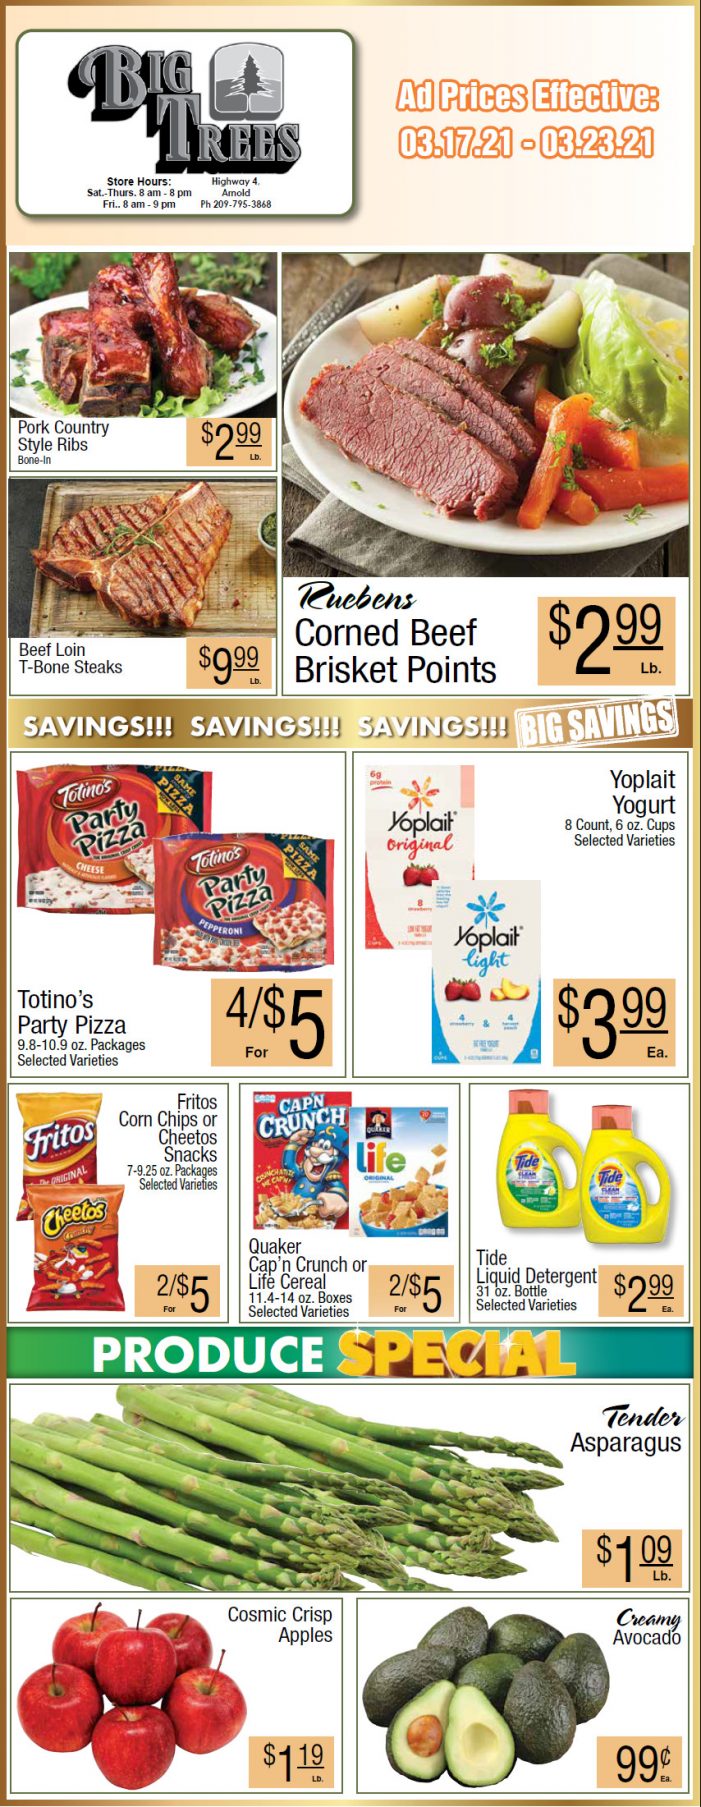 Big Trees Market Weekly Ad & Grocery Specials Through March 23rd